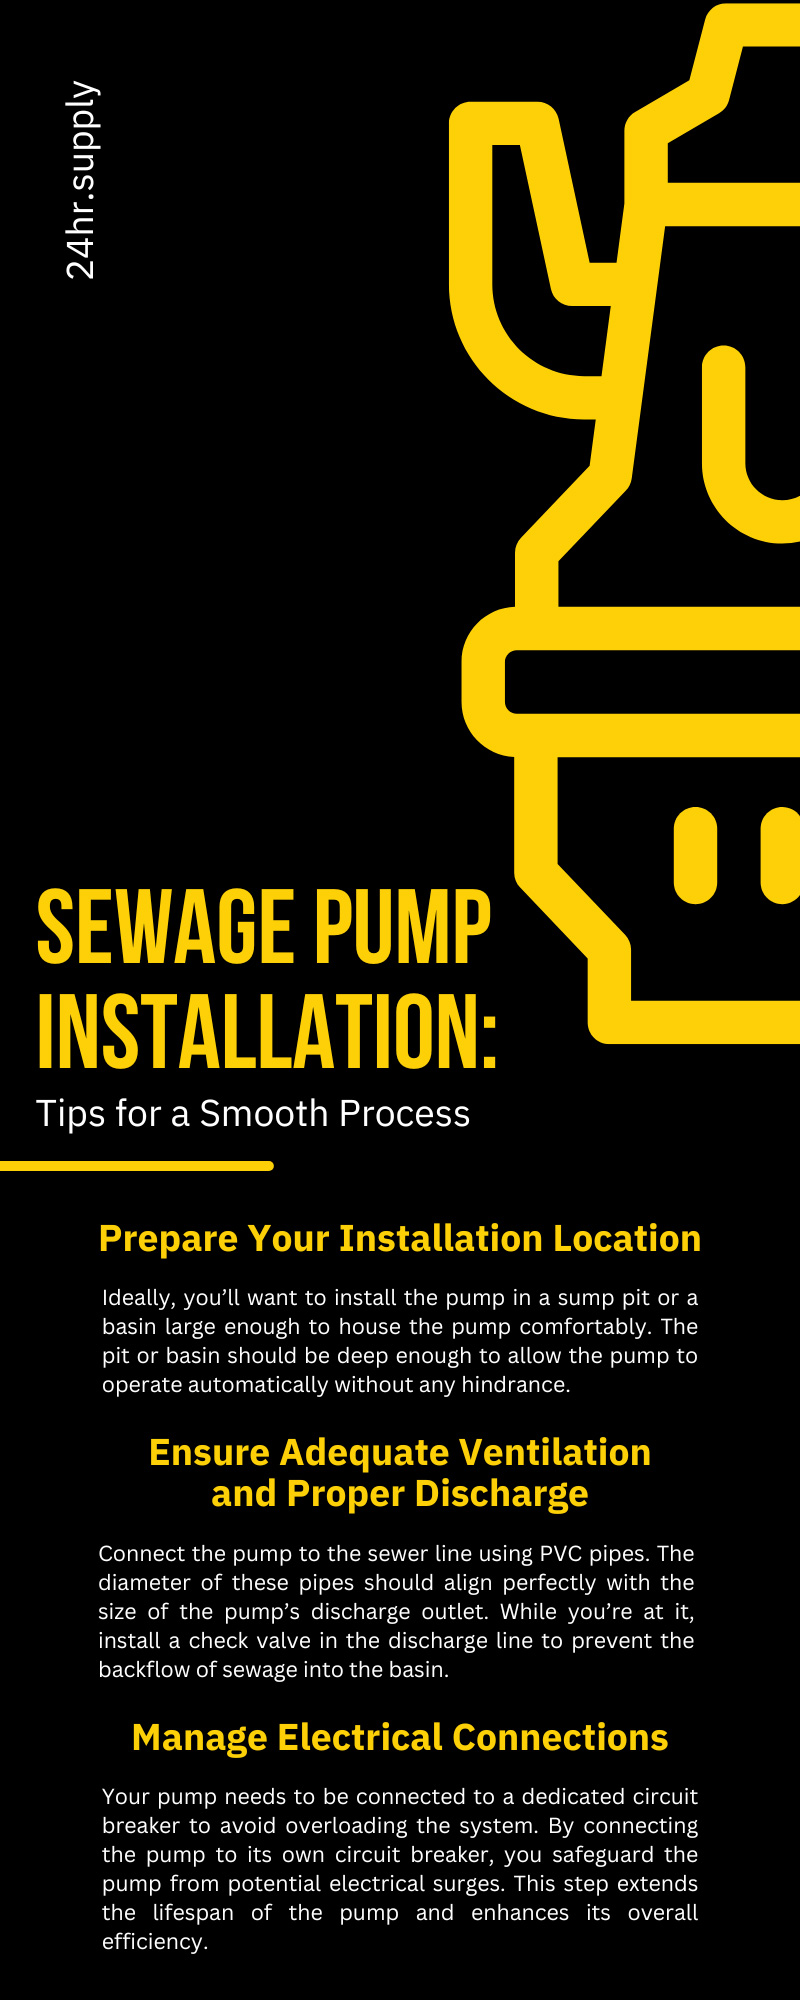 Sewage Pump Installation: Tips for a Smooth Process